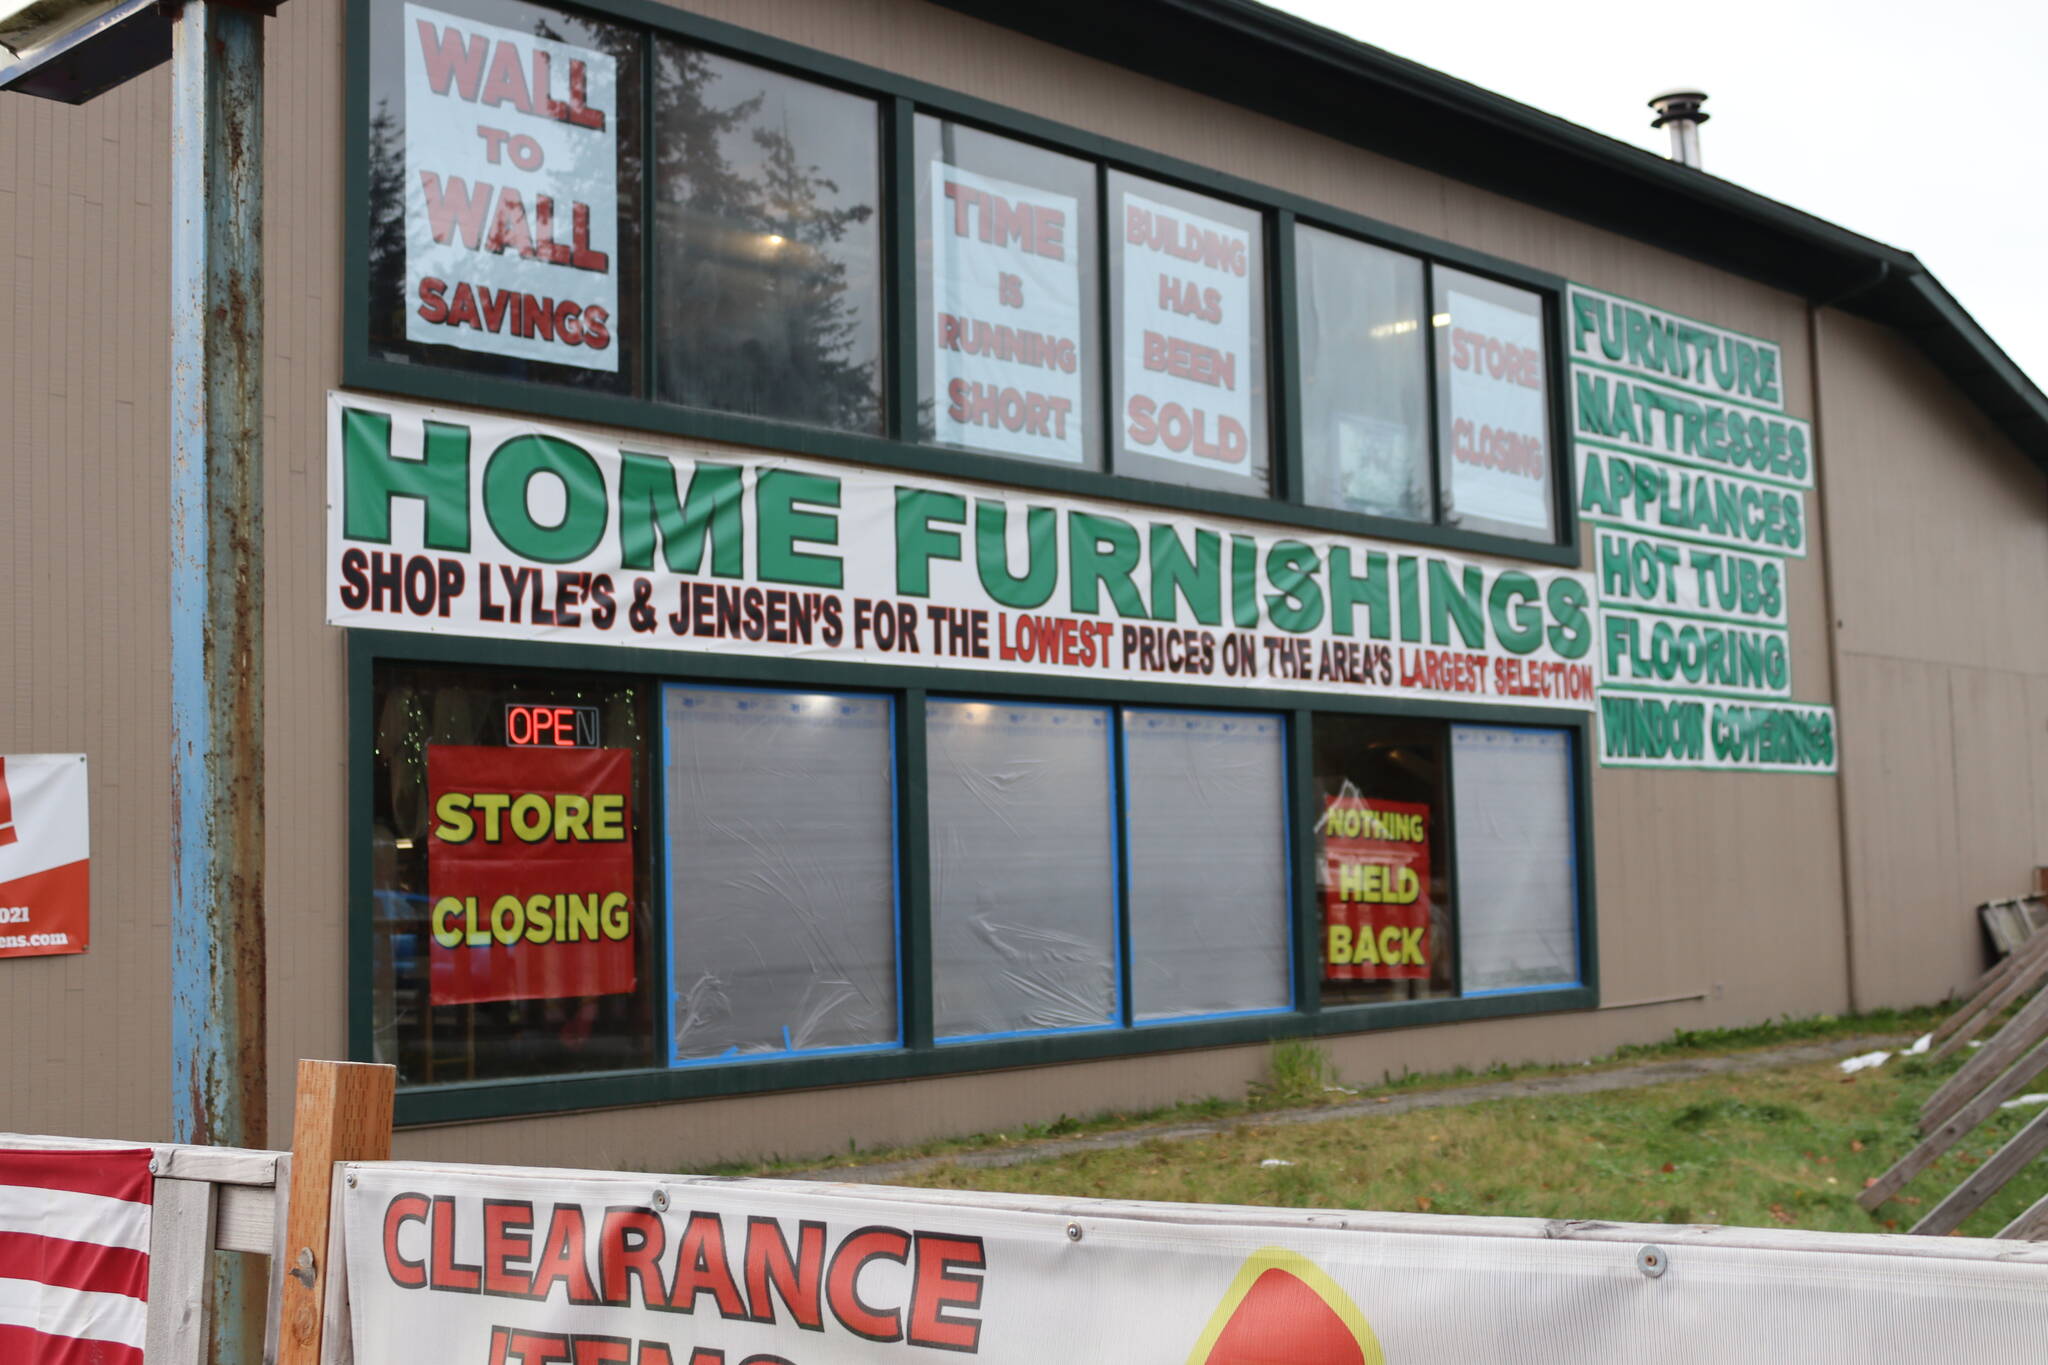 Lyle’s & Jensen’s Home Furnishings on Jordan Avenue, a family business in that location for about 27 years, has sold the building, but will continue to operate in the location until the end of December. (Meredith Jordan/ Juneau Empire)